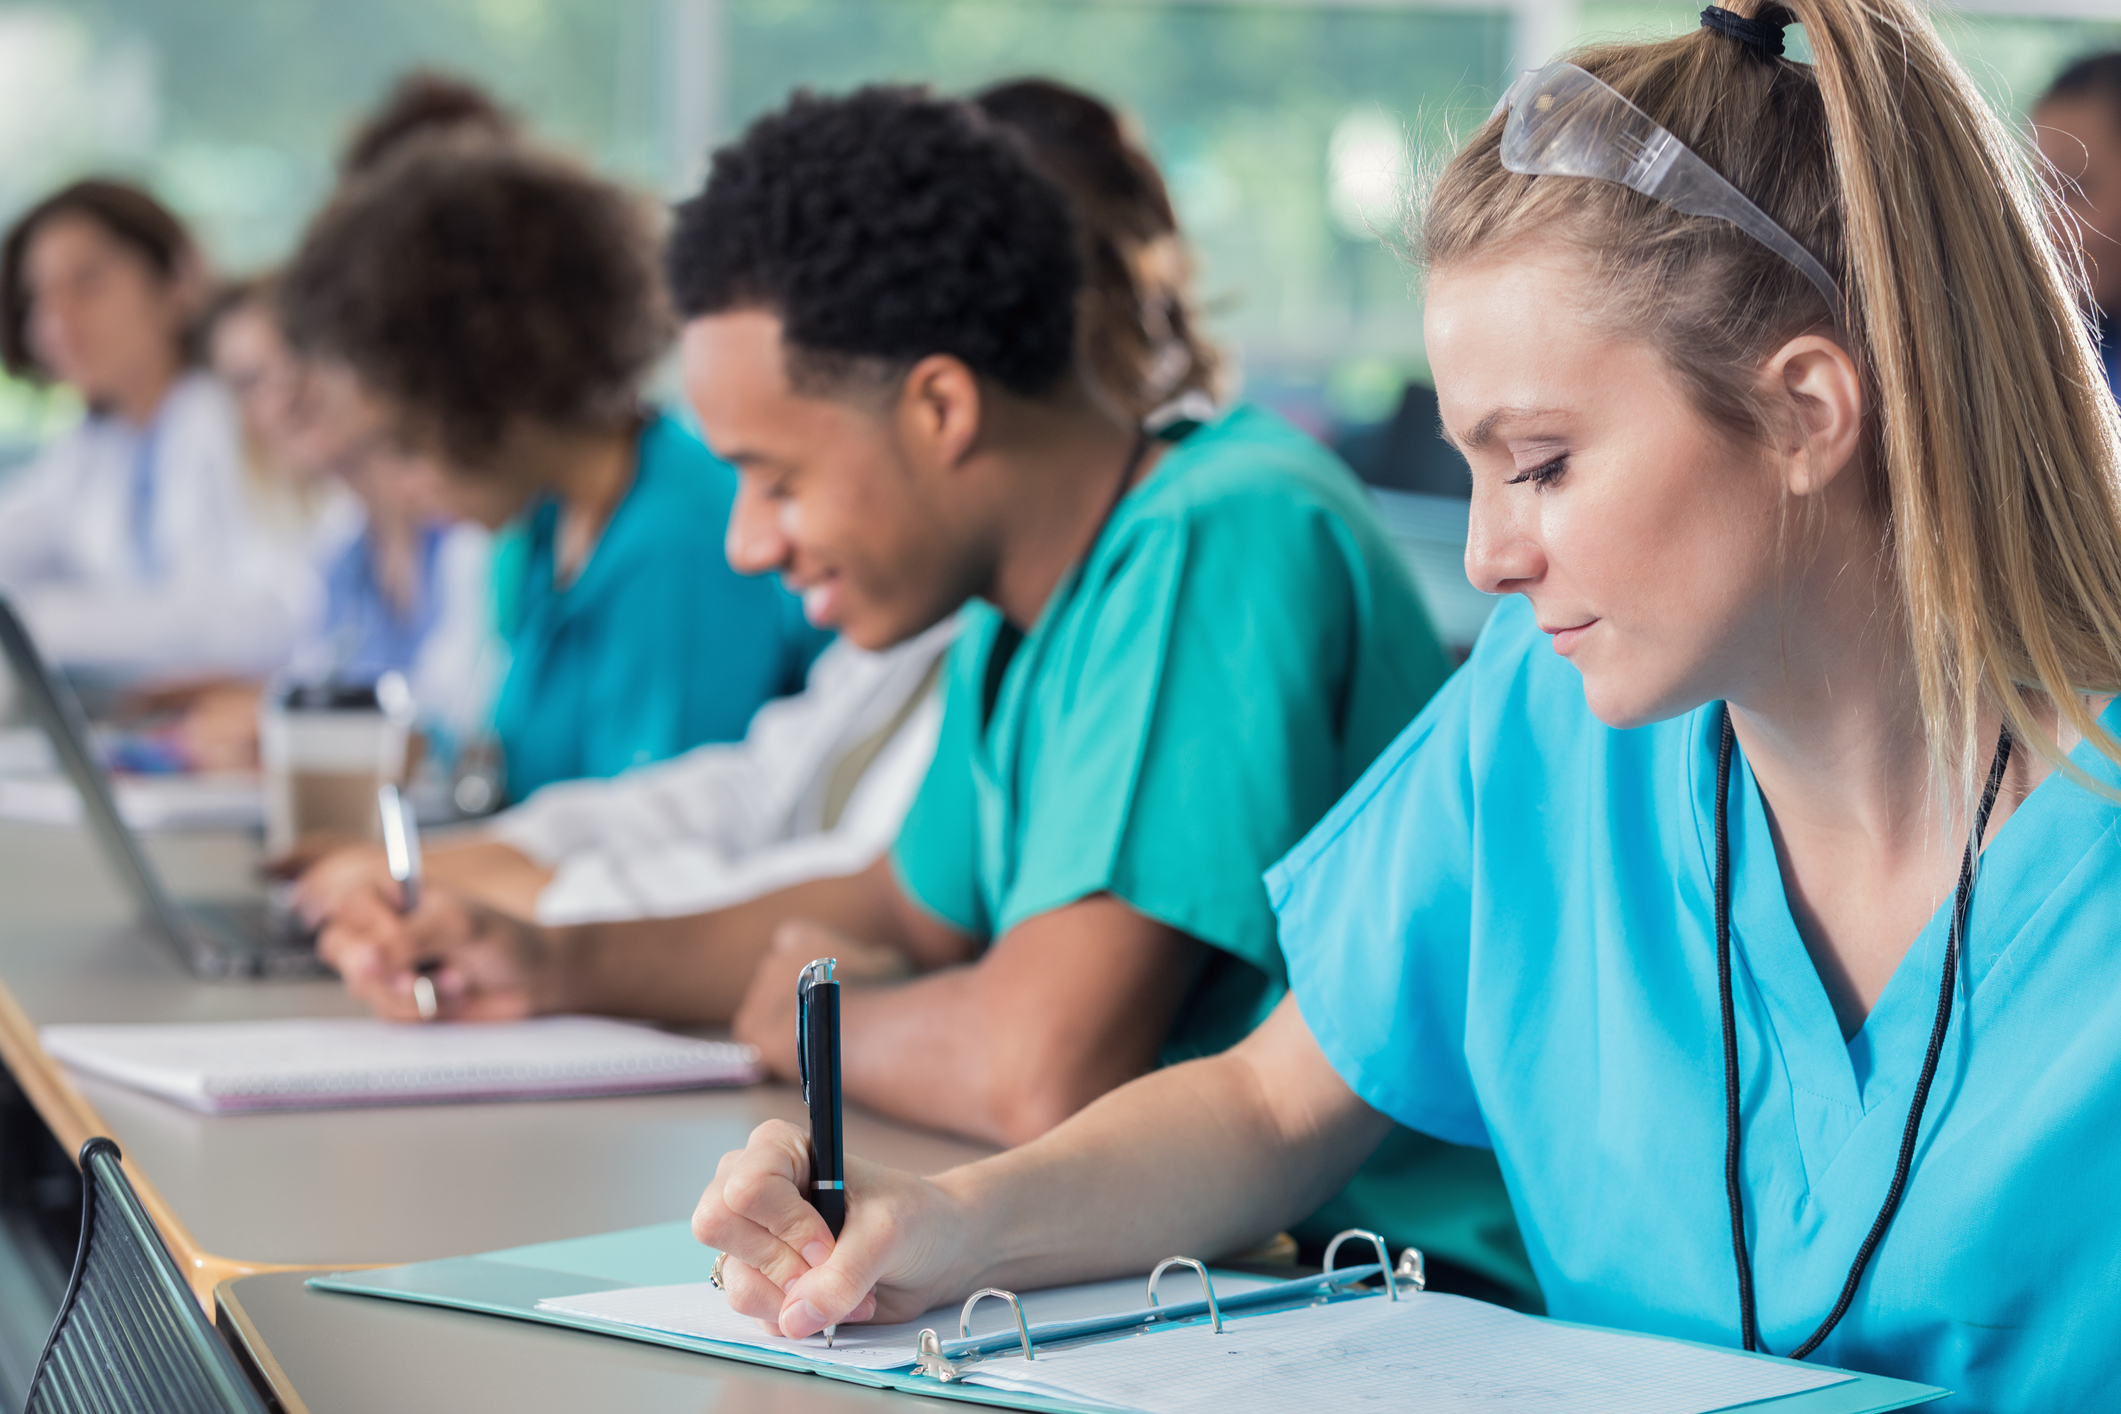 Medical Assistant students taking notes in a classroom